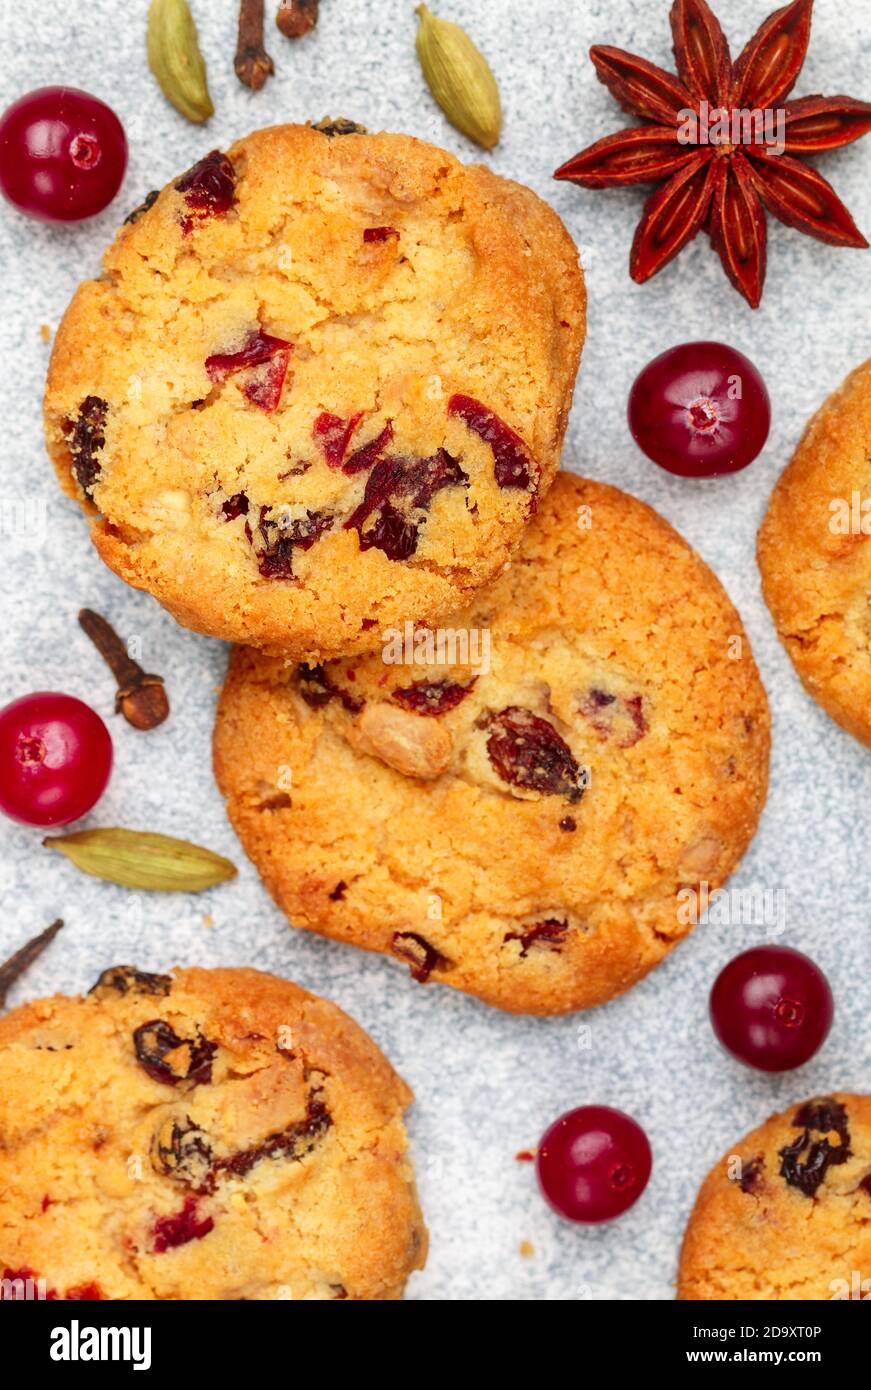 Freshly baked homemade cookies with cranberries, almonds, white chocolate and spices (cinnamon, cardamom, cloves, star anise) close-up. Oatmeal biscui Stock Photo